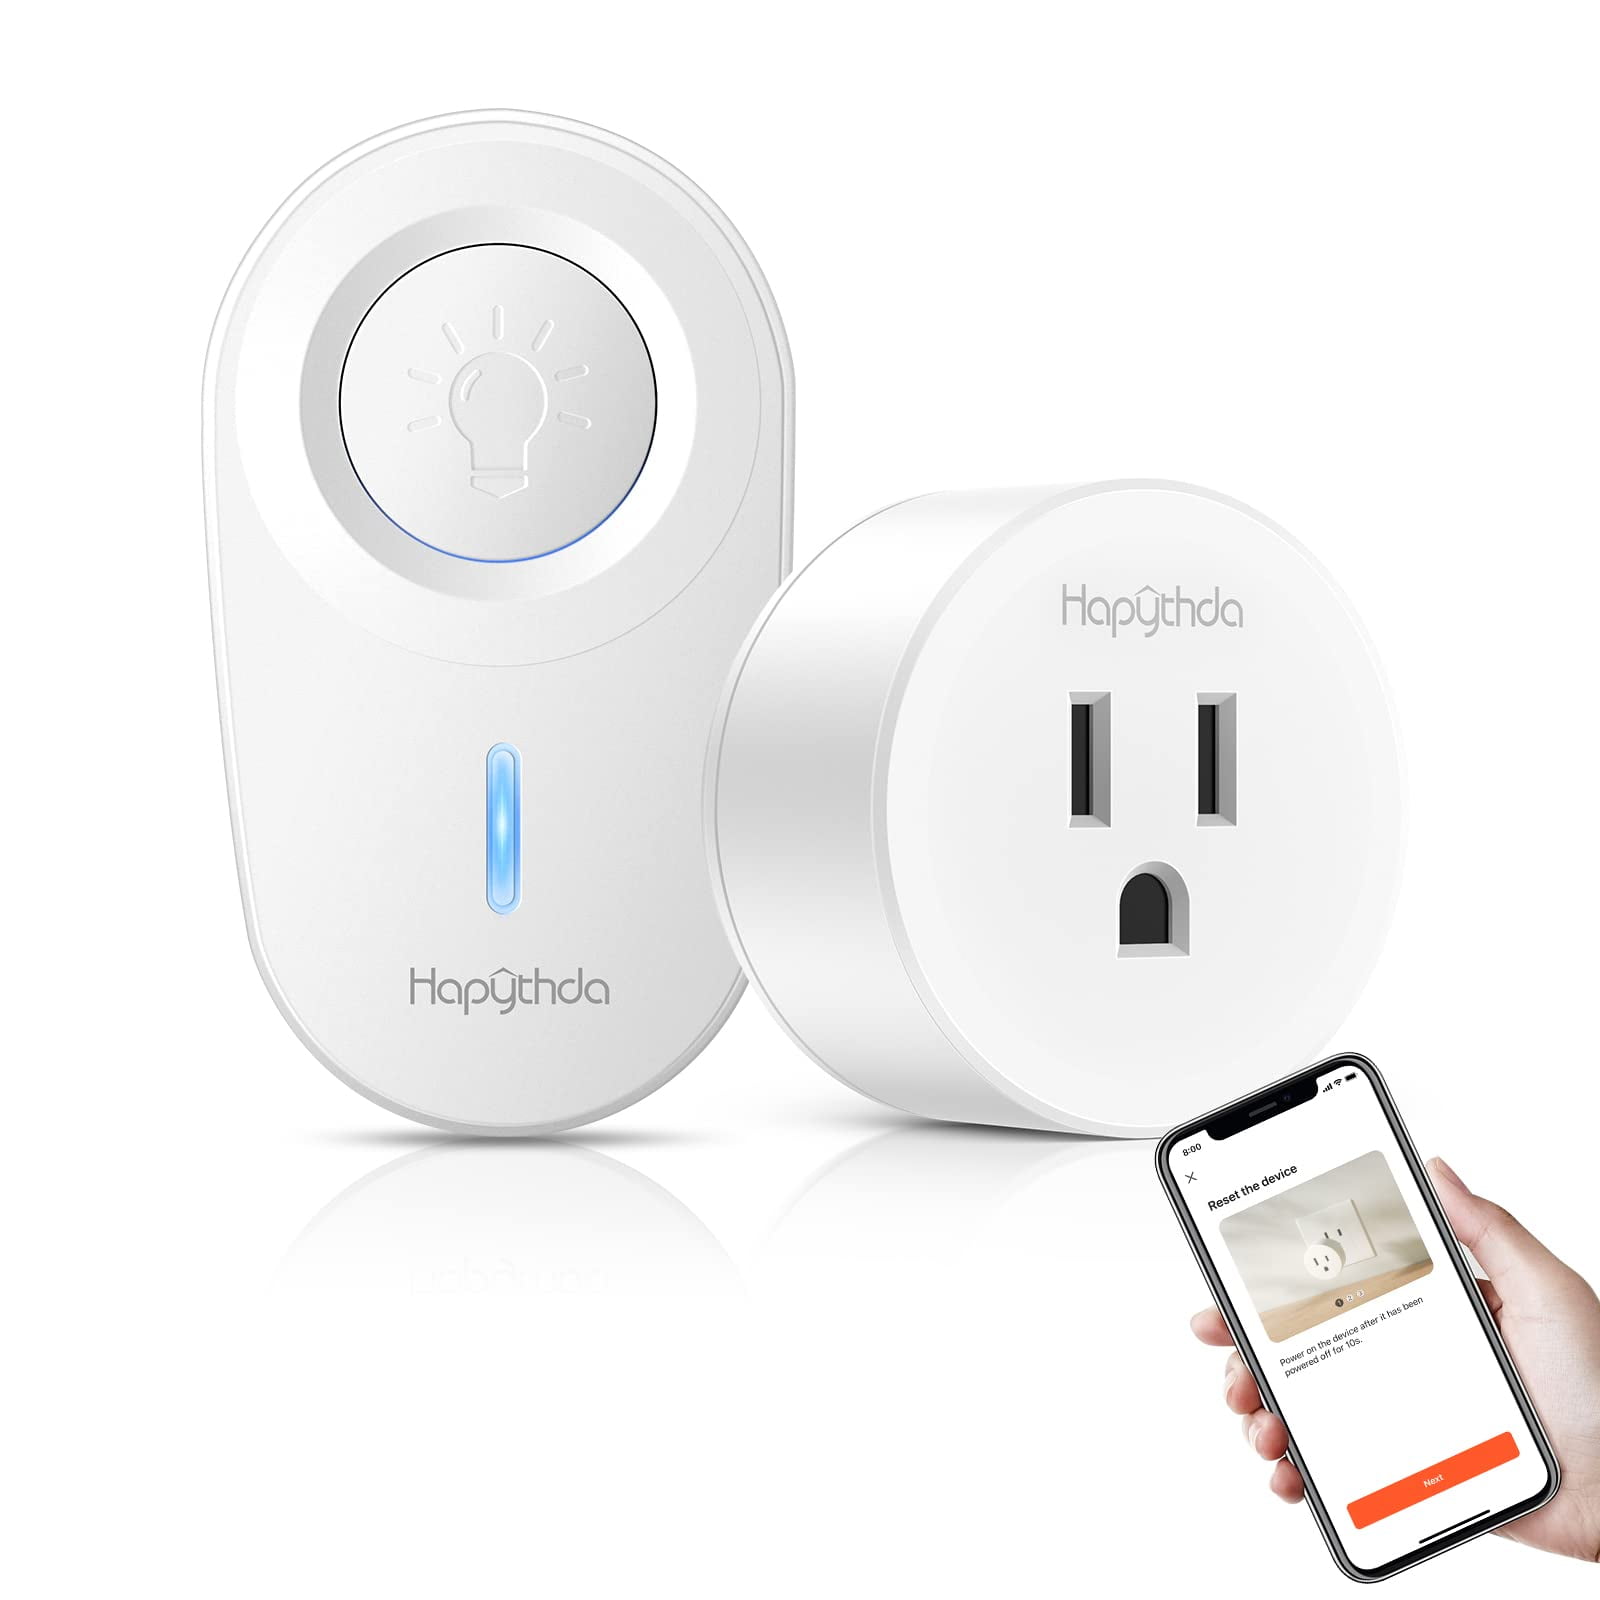 Smart Outlet Wireless Power Outlet